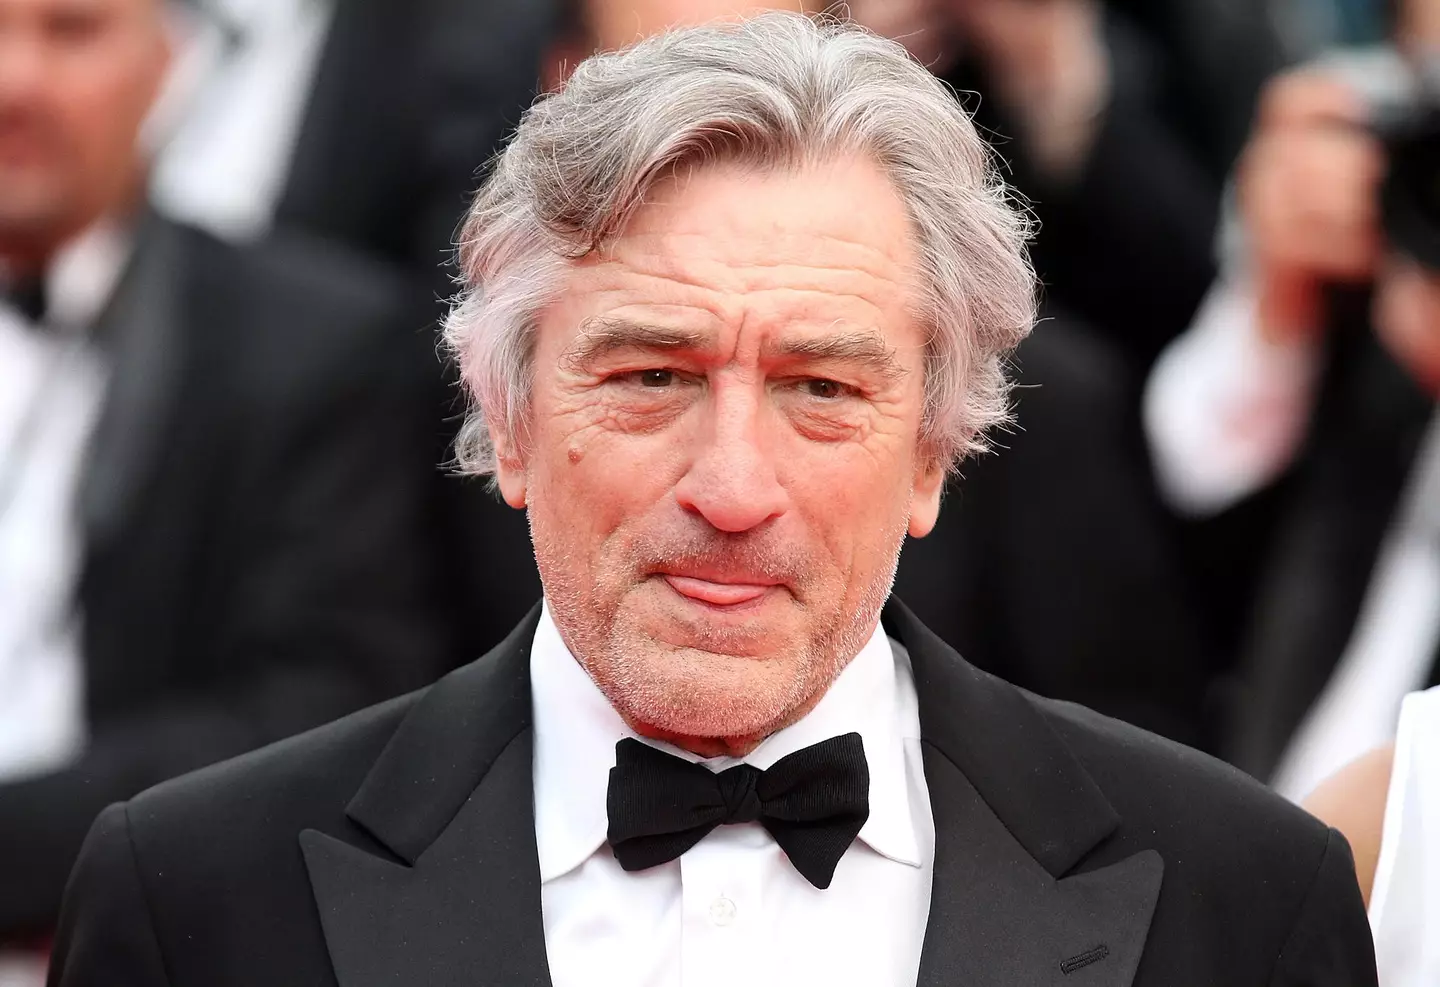 Robert De Niro was 'freaked out' by Aubrey Plaza on the set of Dirty Grandpa.